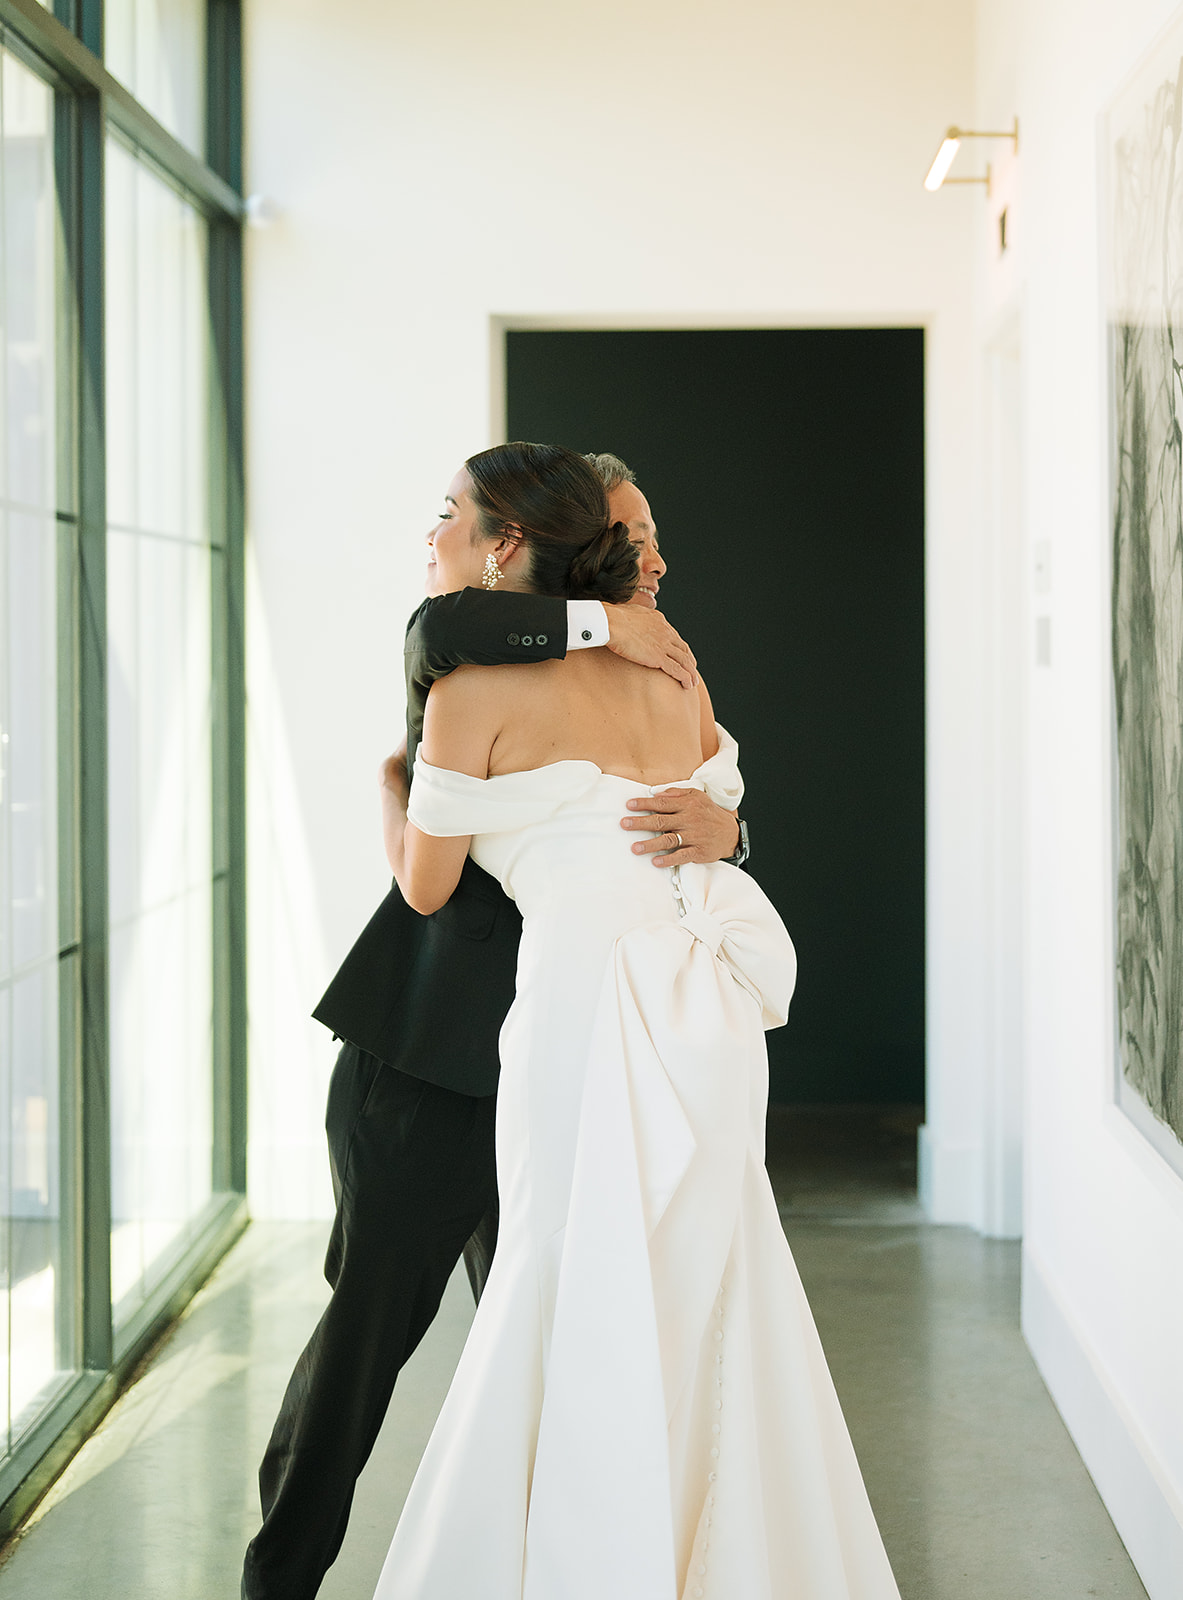 A father hugs his bride after seeing her in her dress for the first time in a hall by a large window